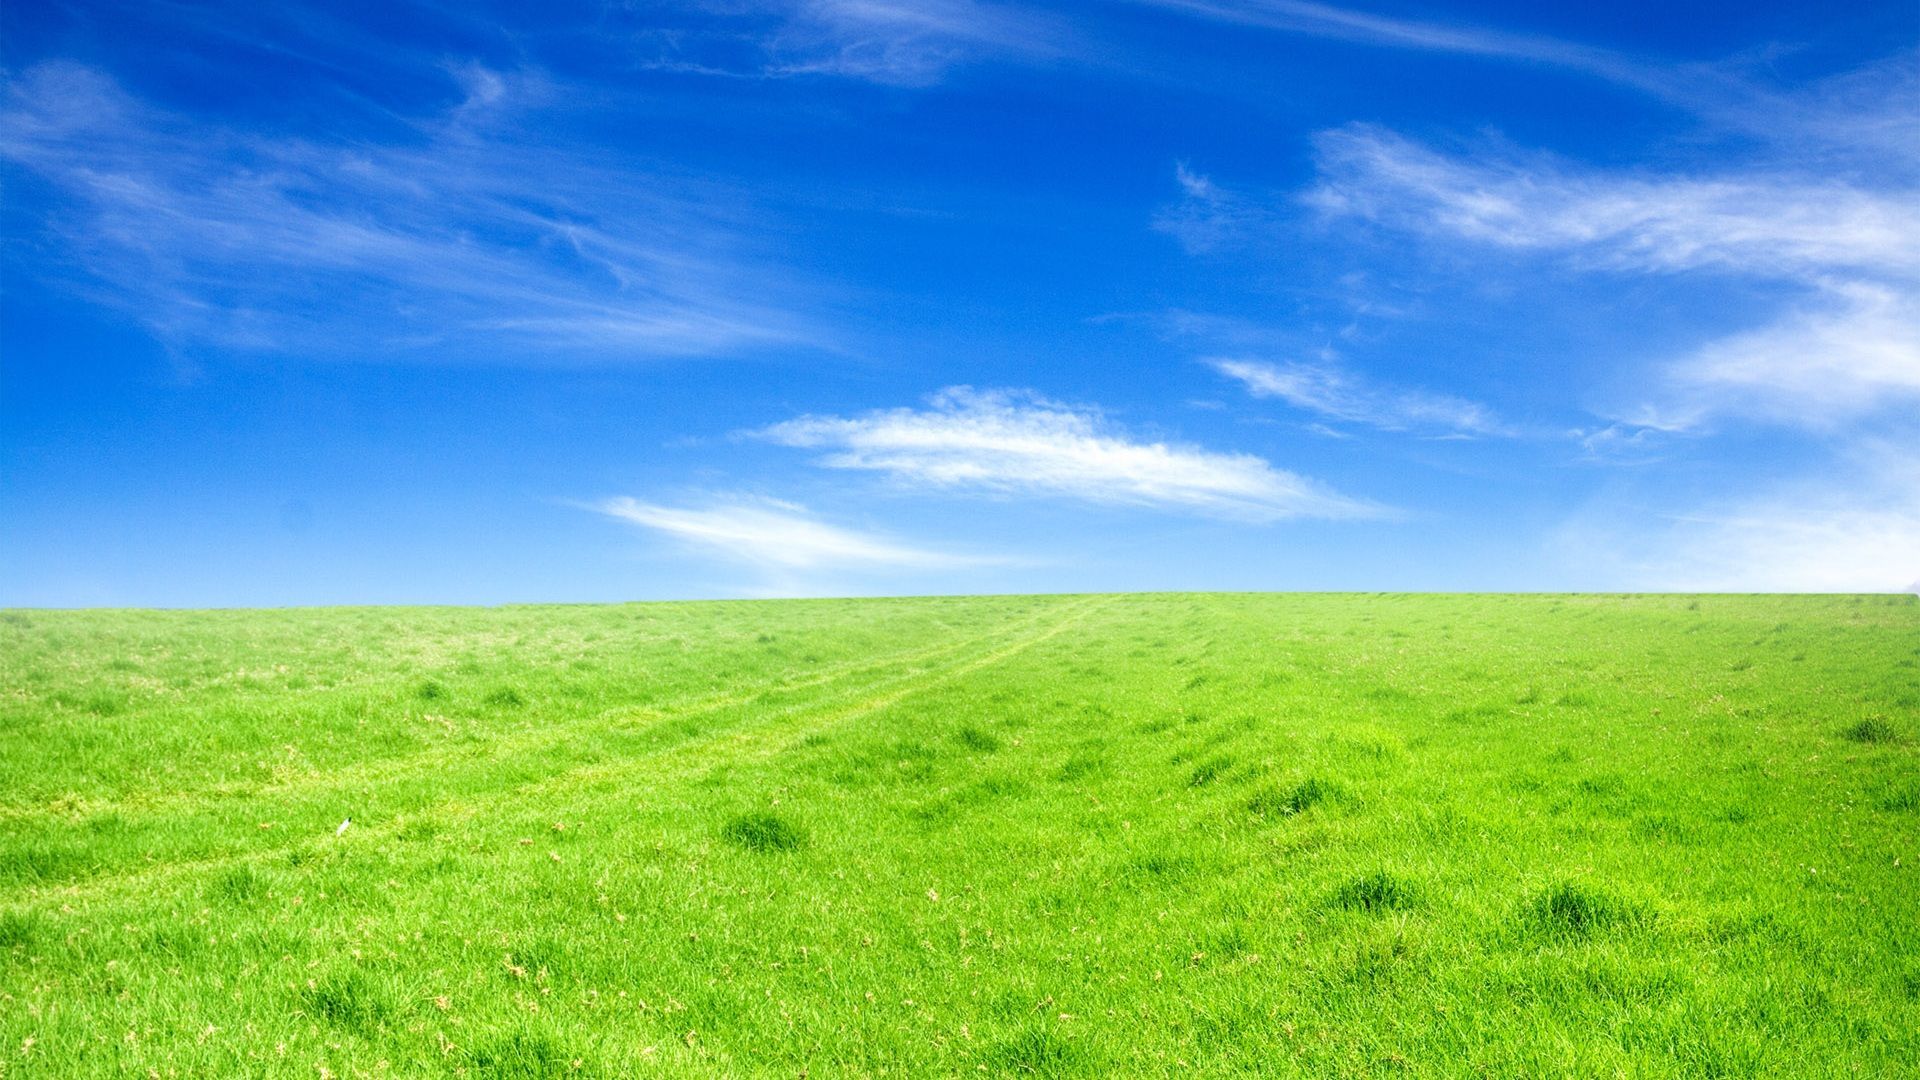 Sky and Grass Wallpaper Free Sky and Grass Background